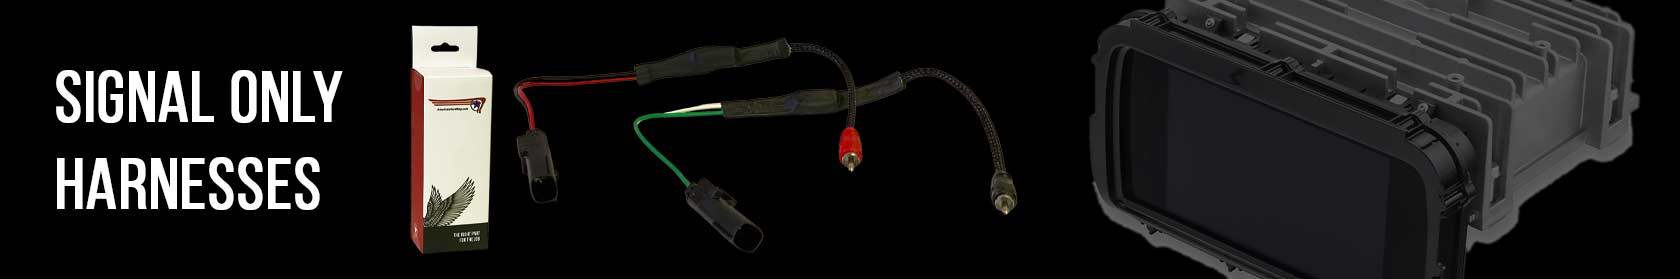 Harley front or rear audio signal harnesses